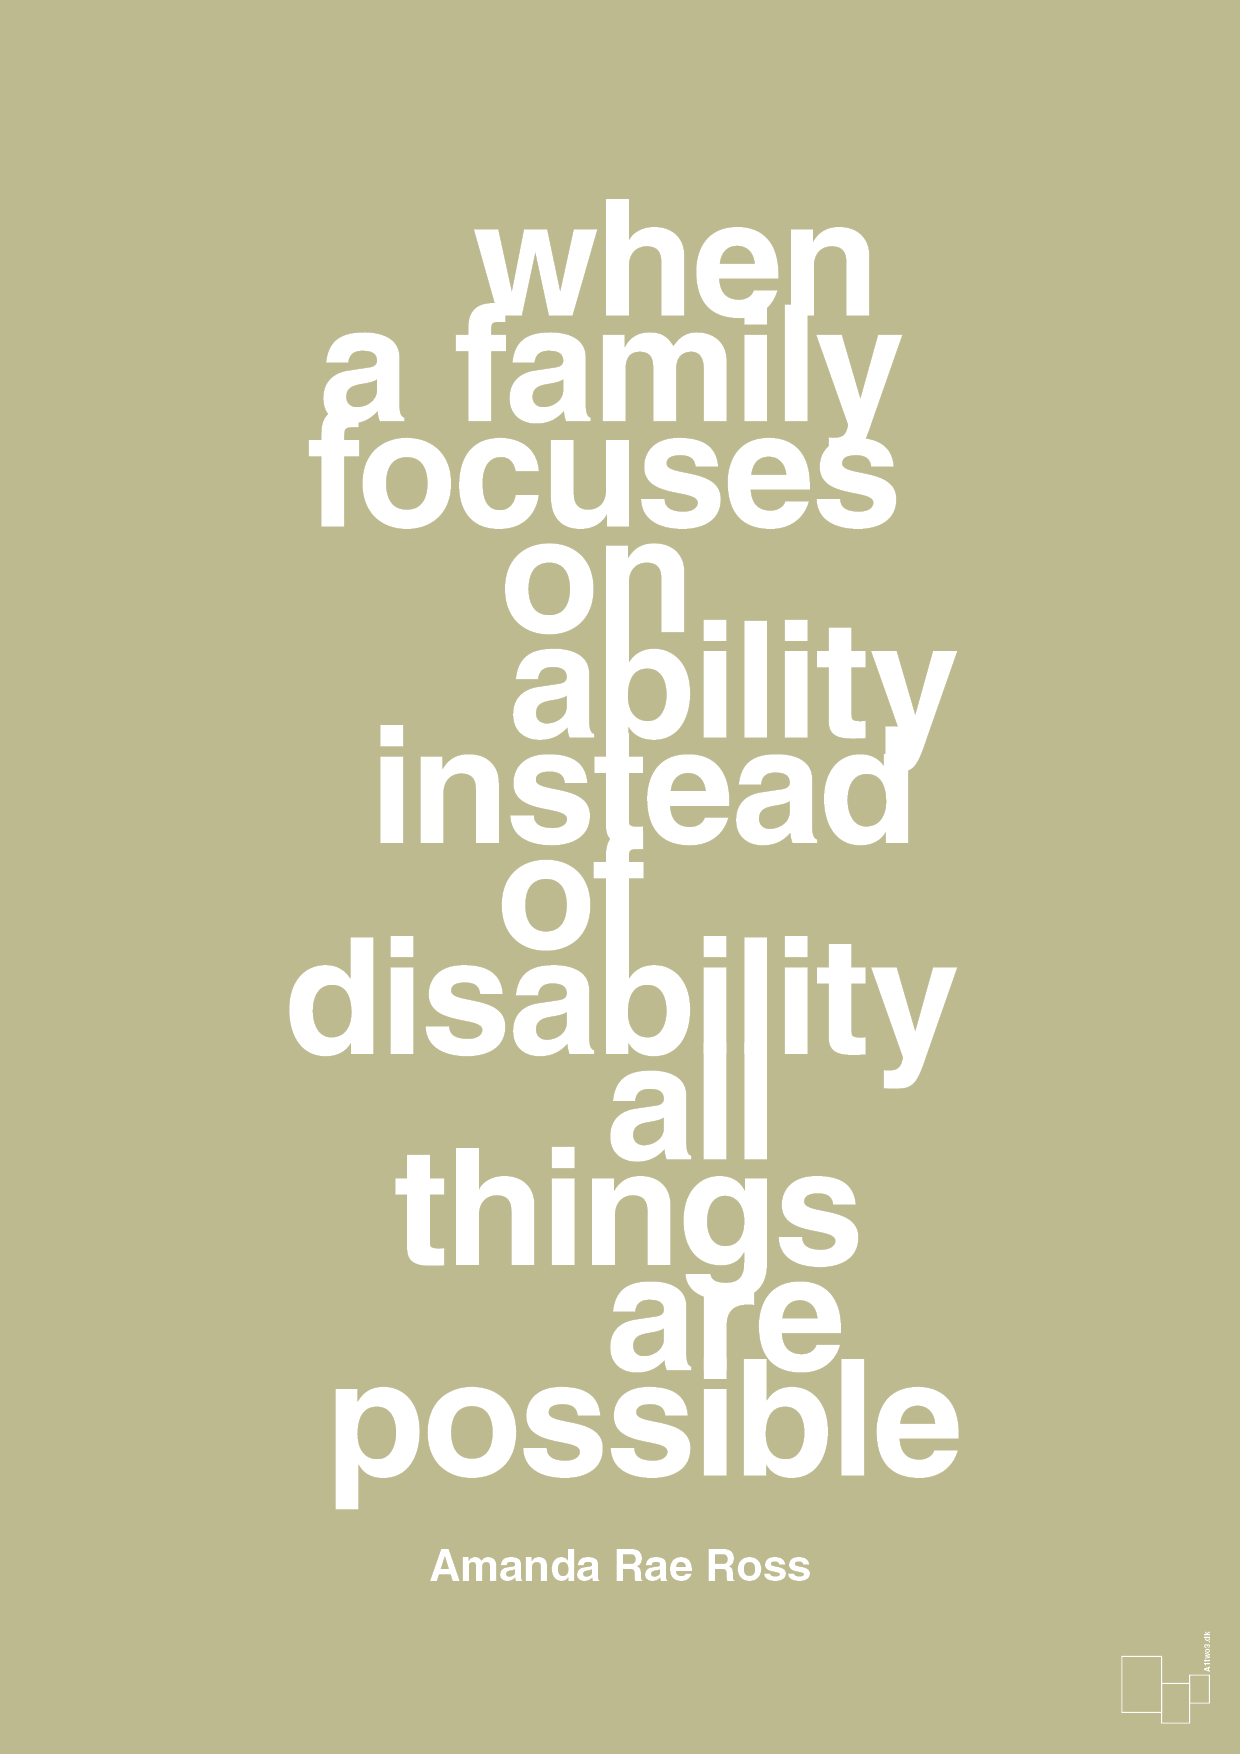 when a family focuses on ability instead of disability all things are possible - Plakat med Samfund i Back to Nature